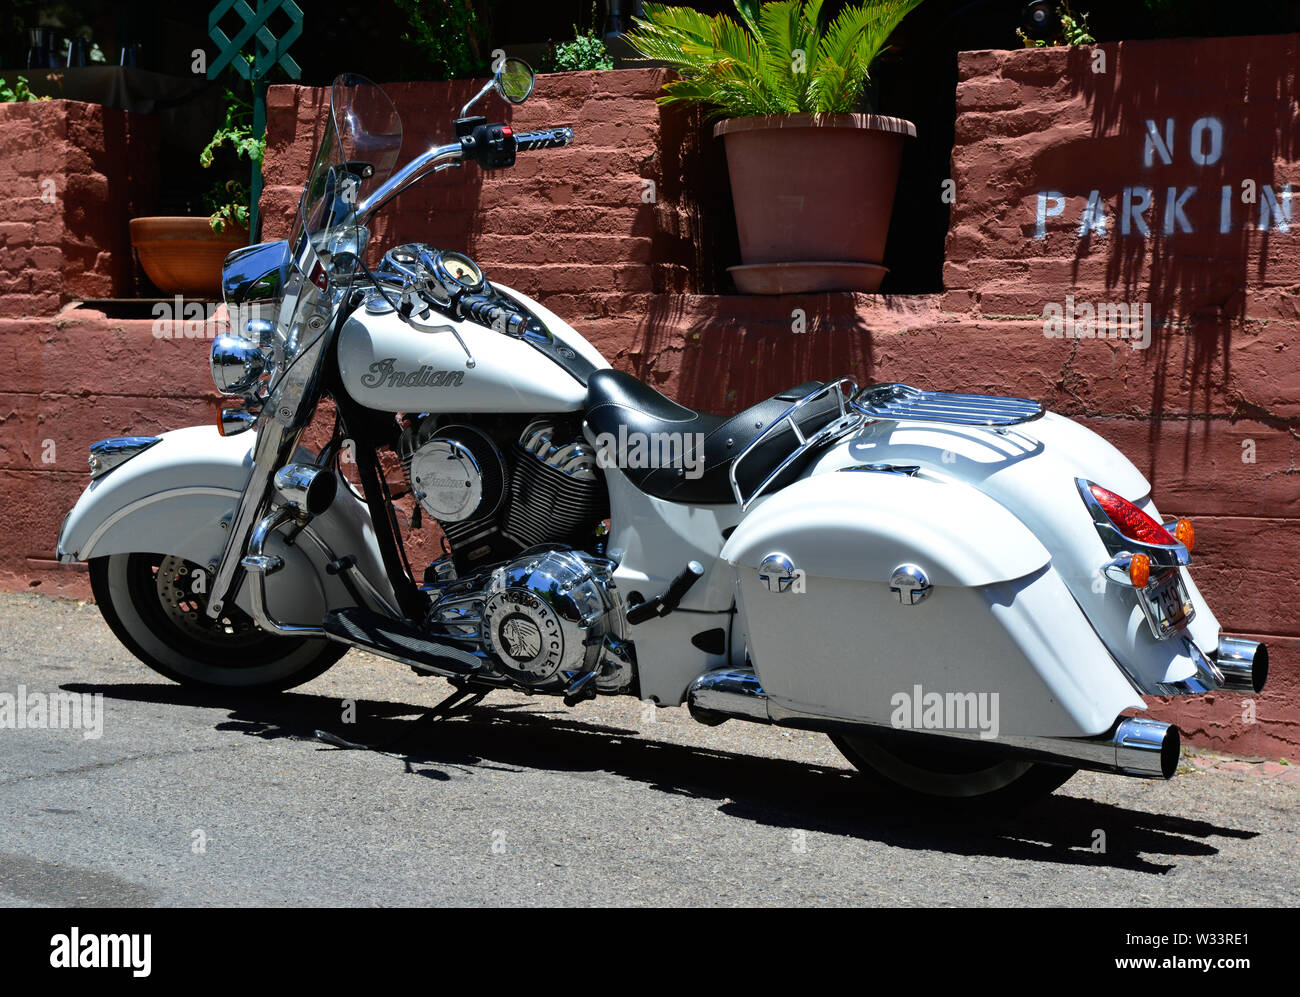 A beautiful white Indian motorcycle parked in a no parking zone near a brick wall with garden in the Southwestern USA, Stock Photo